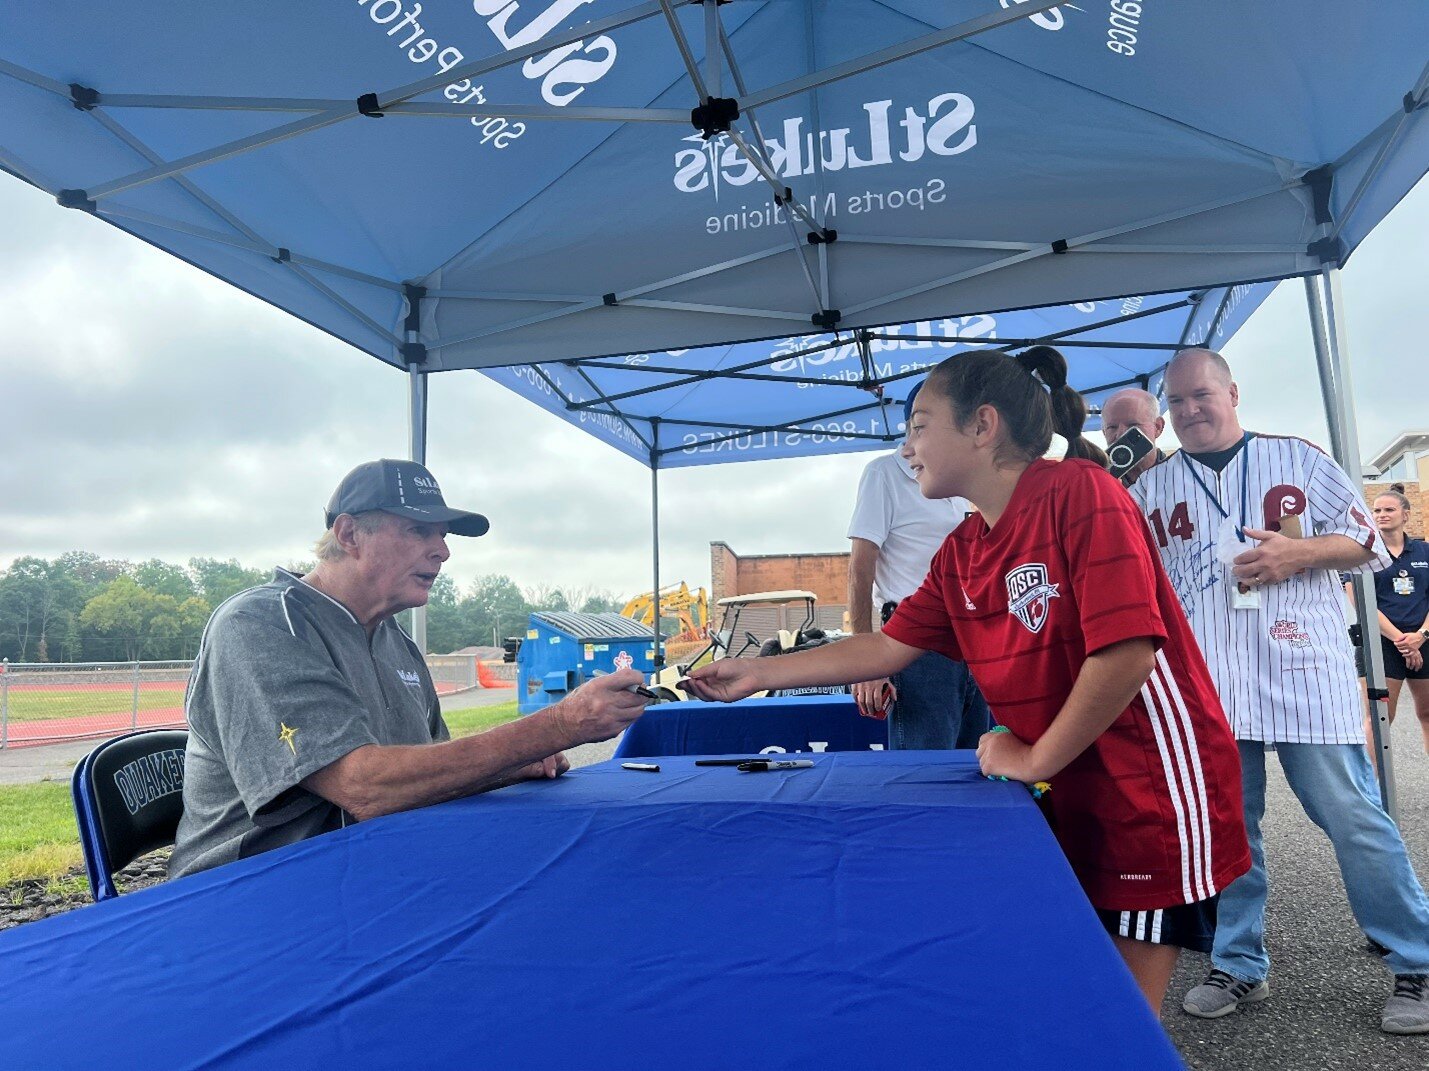 Steve Carlton signs an autograph for 11-year-old Izzy Pallone, a Quakertown resident and a softball and baseball player who is a fellow lefty.